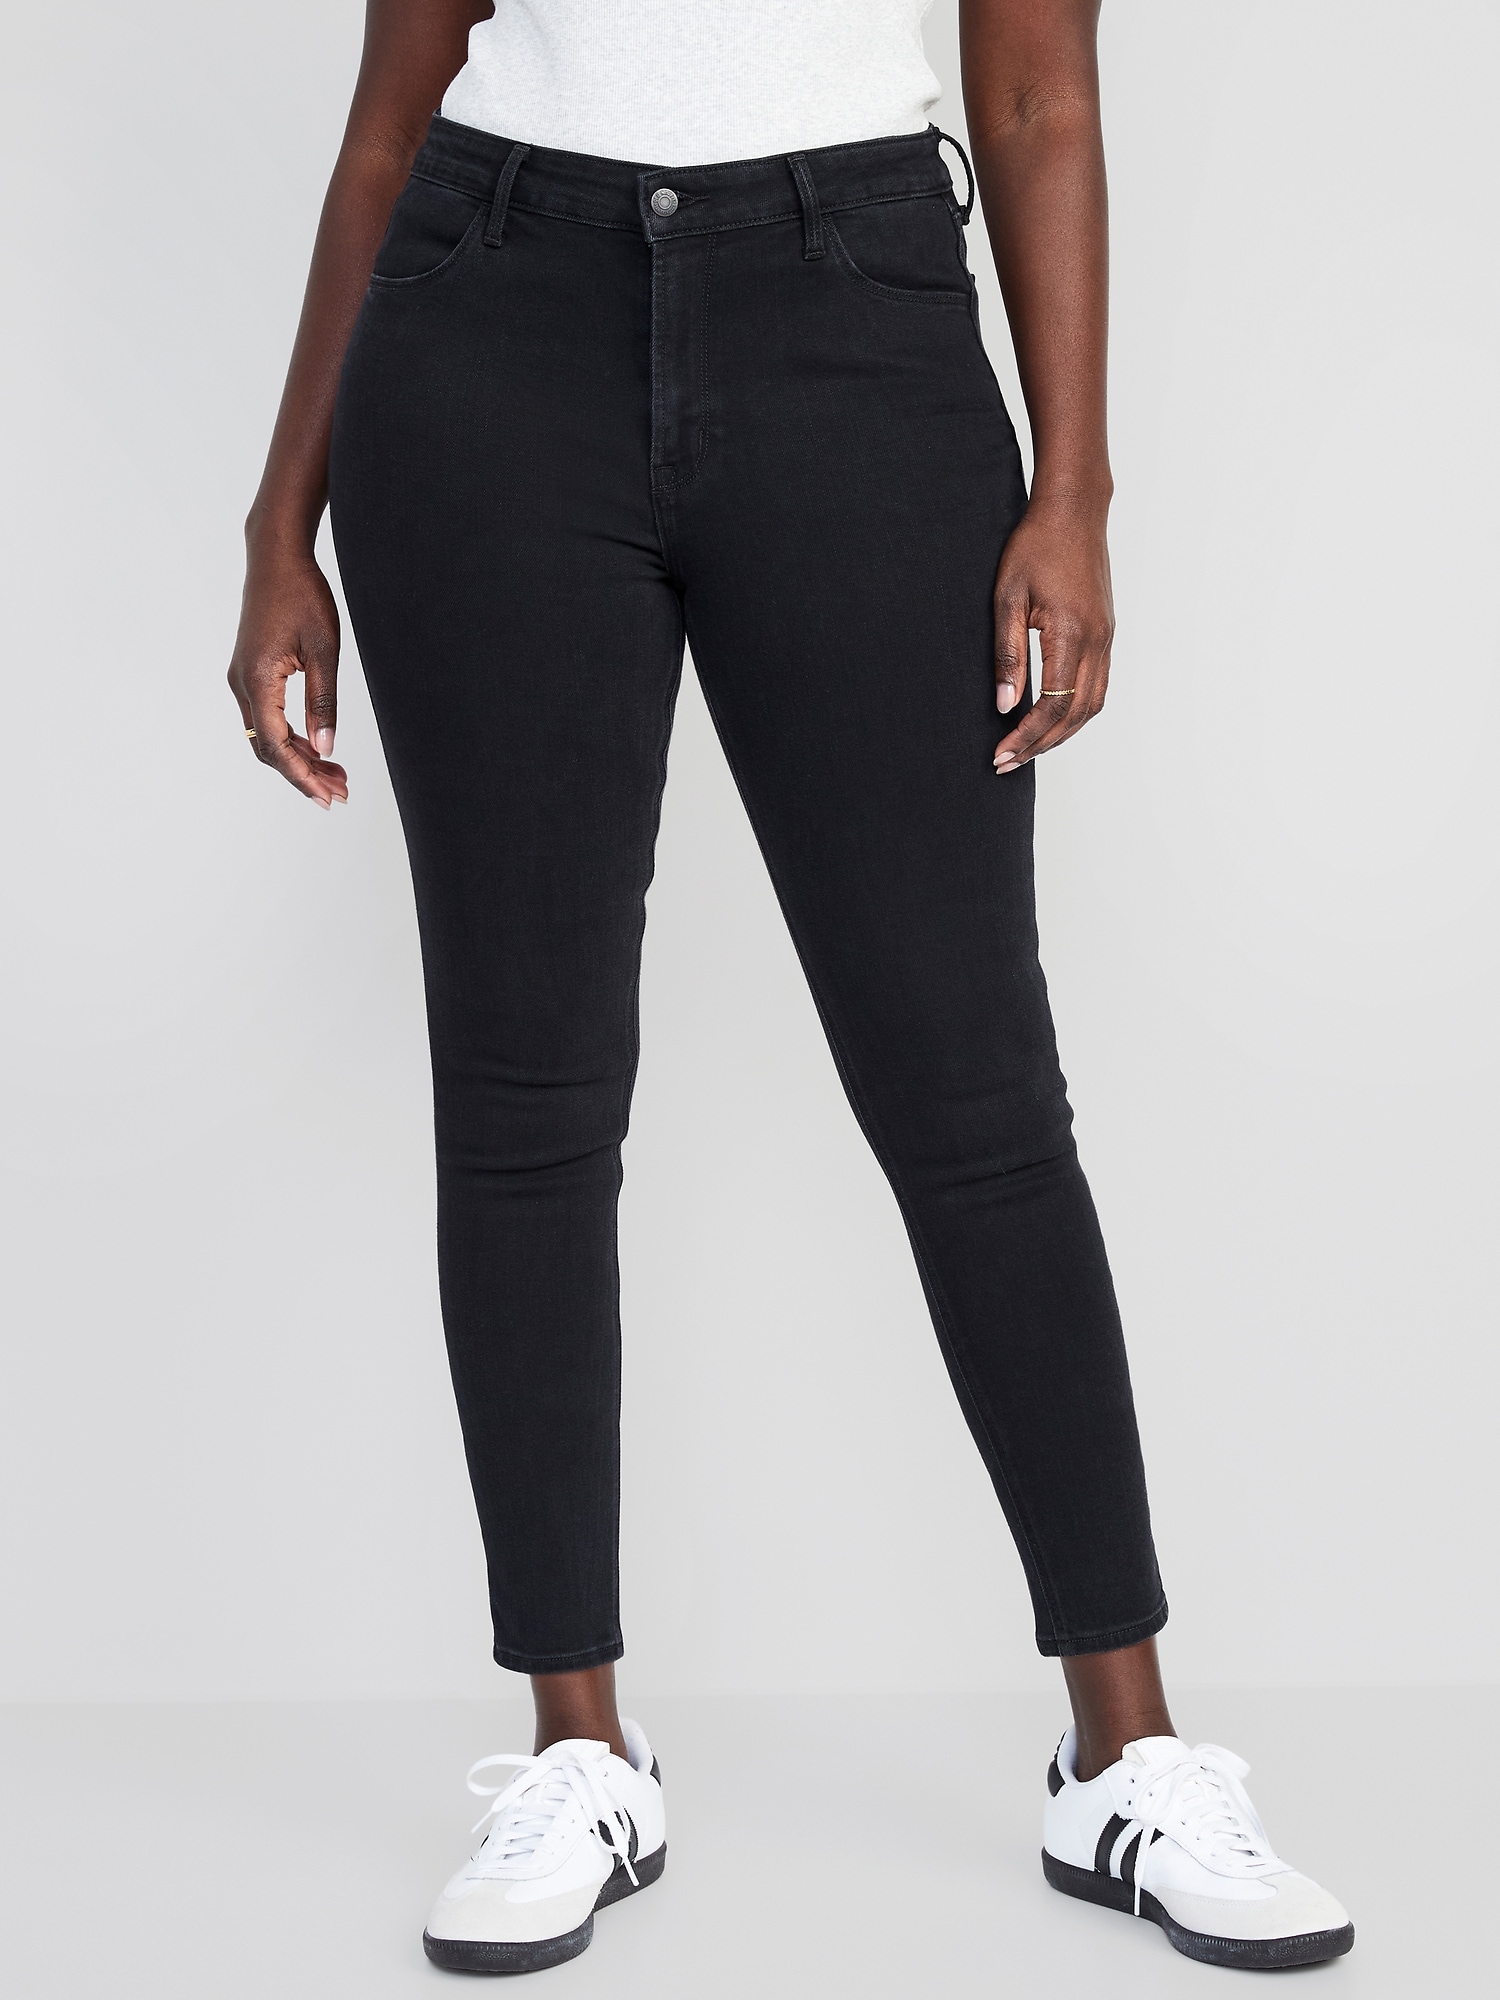 High-Waisted Wow Super-Skinny Black-Wash Ankle Jeans for Women | Old Navy